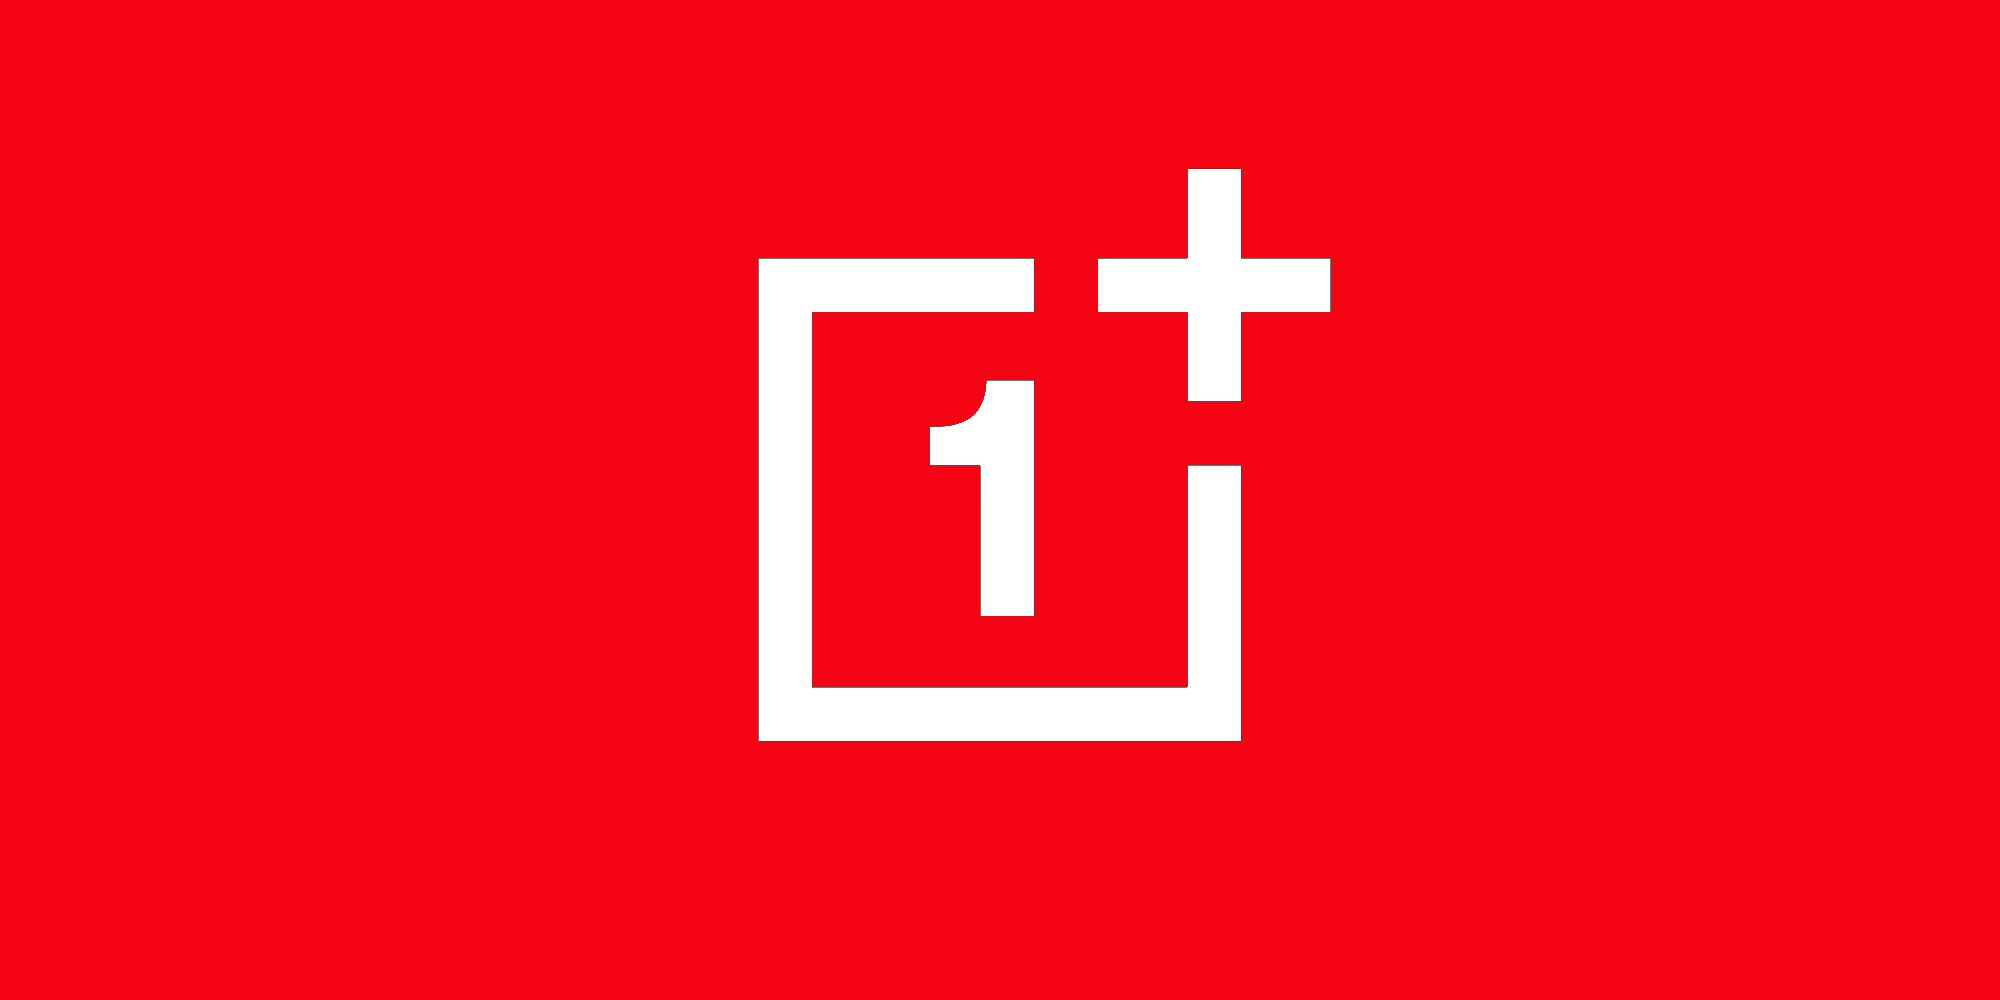 Banner image with the OnePlus logo